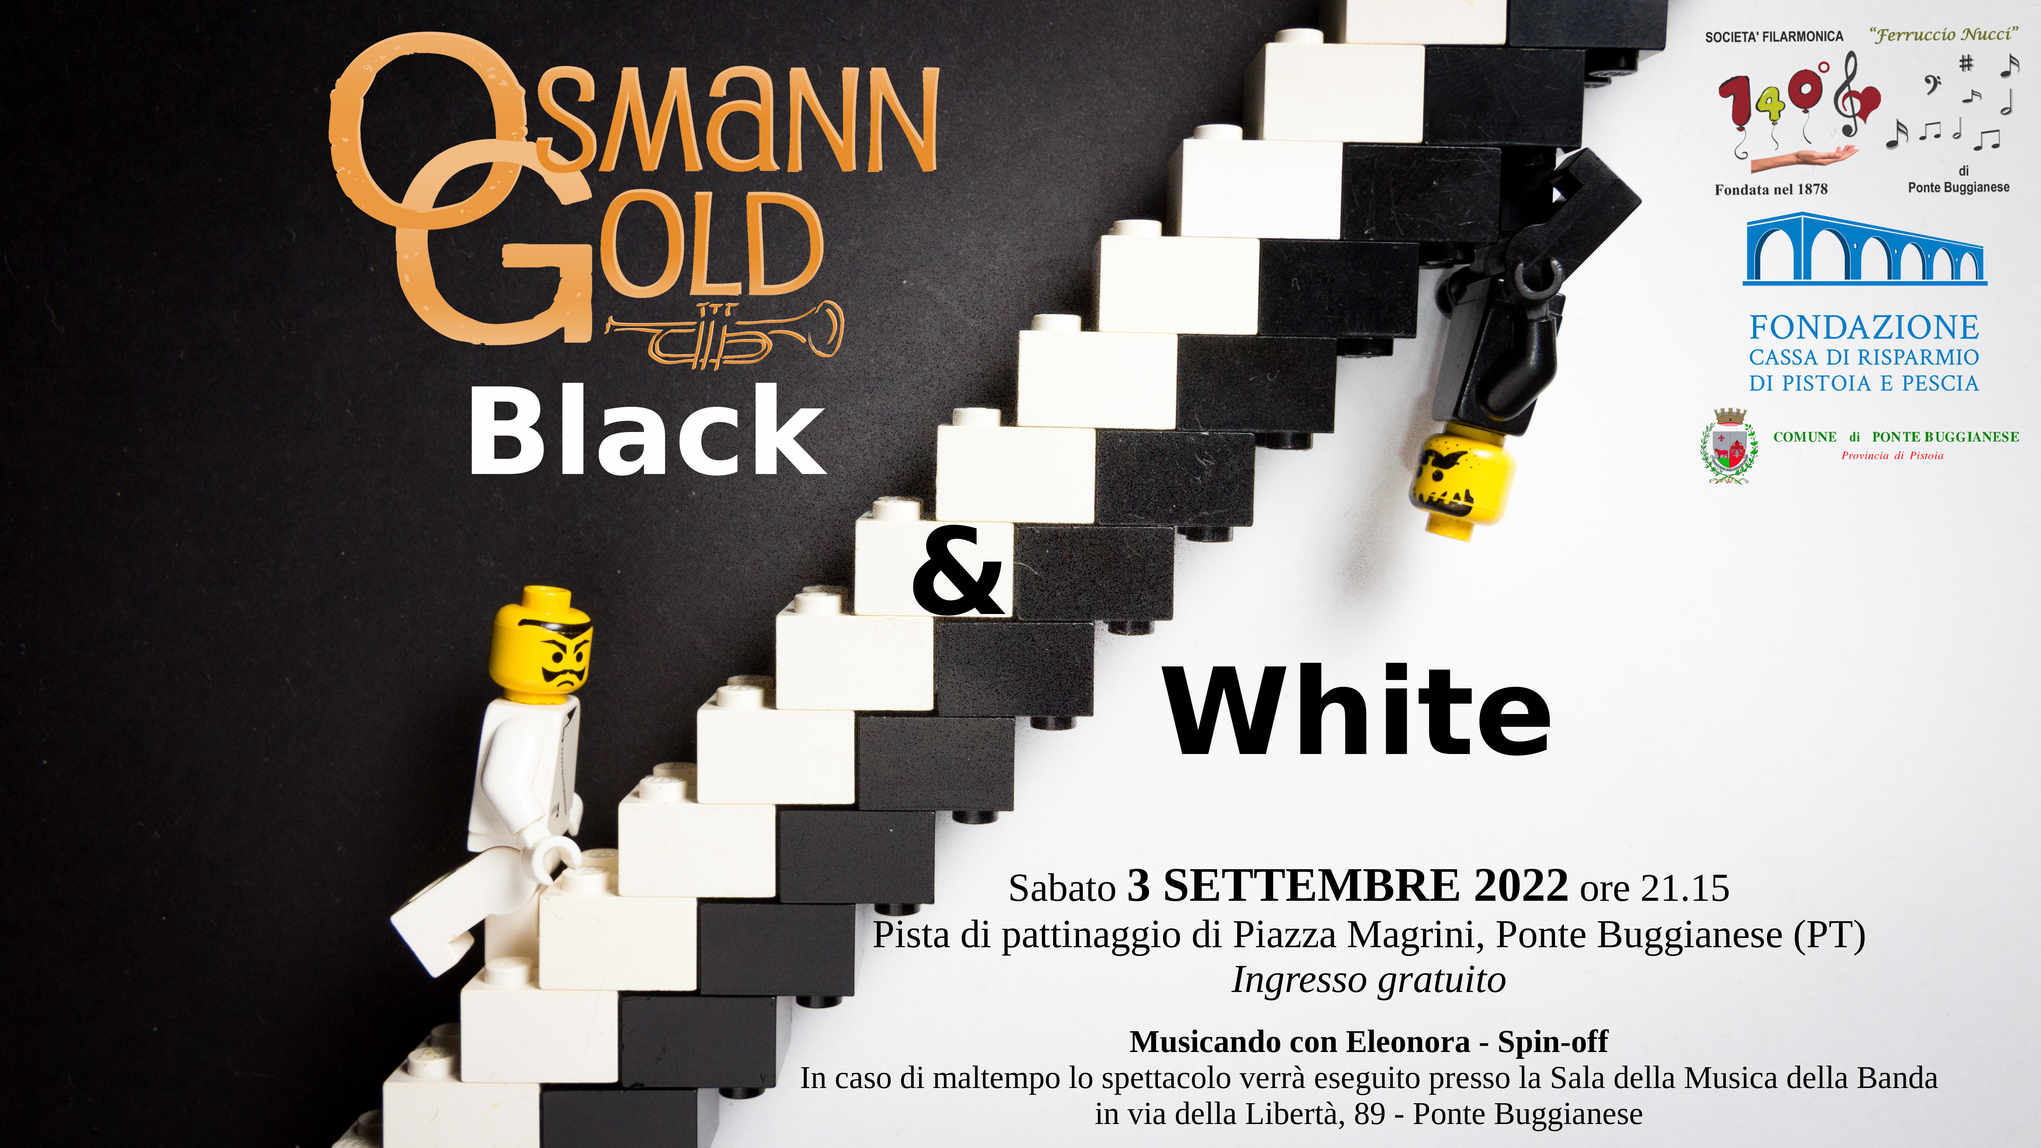 Locandina spettacolo OsmannGold "OsmannGold in Black & White" a Ponte Buggianese